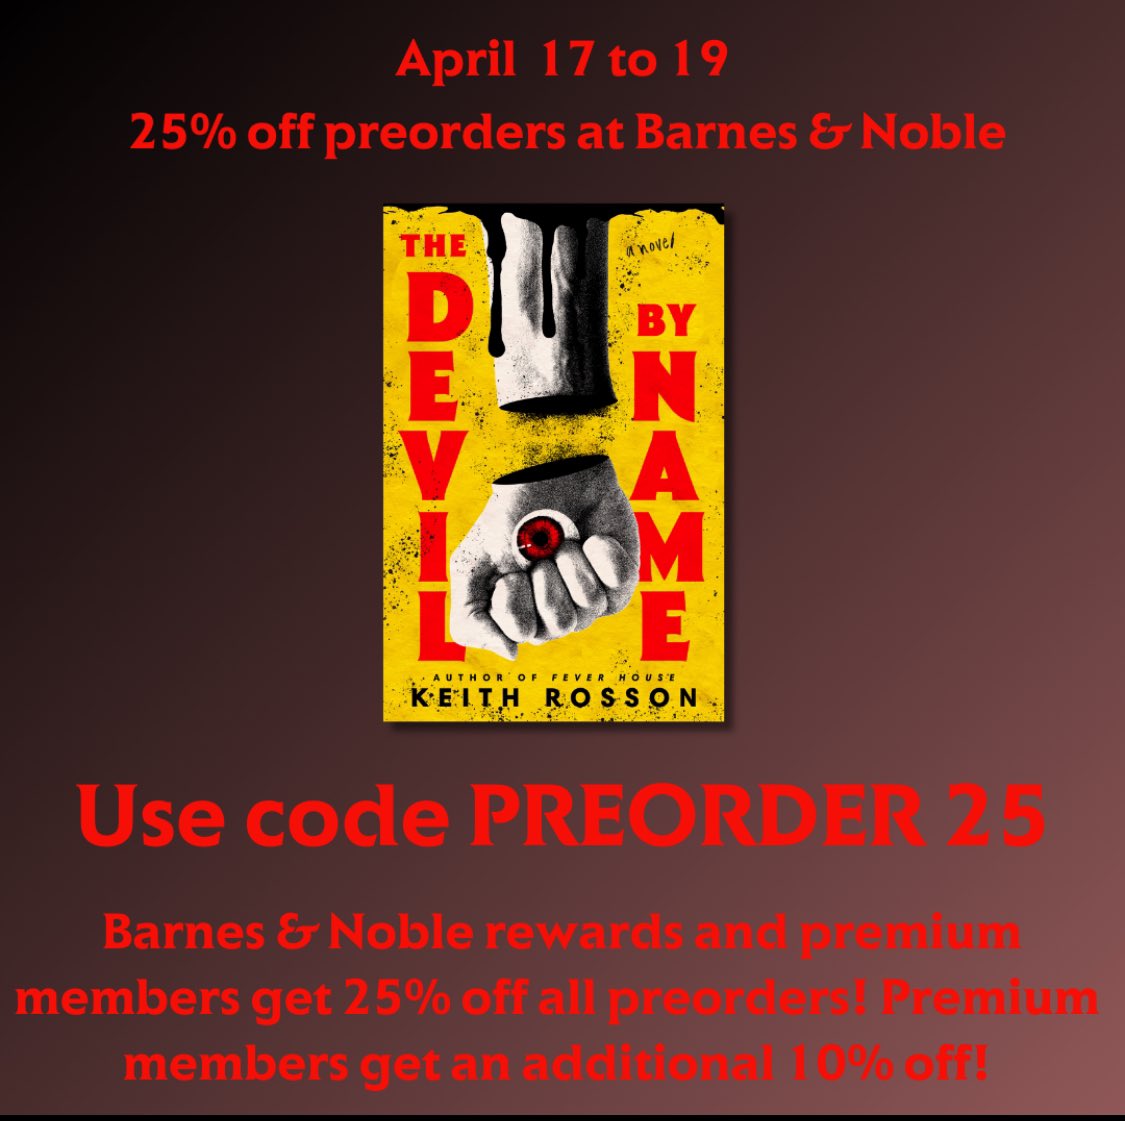 25% off preorders for THE DEVIL BY NAME at Barnes & Noble now!